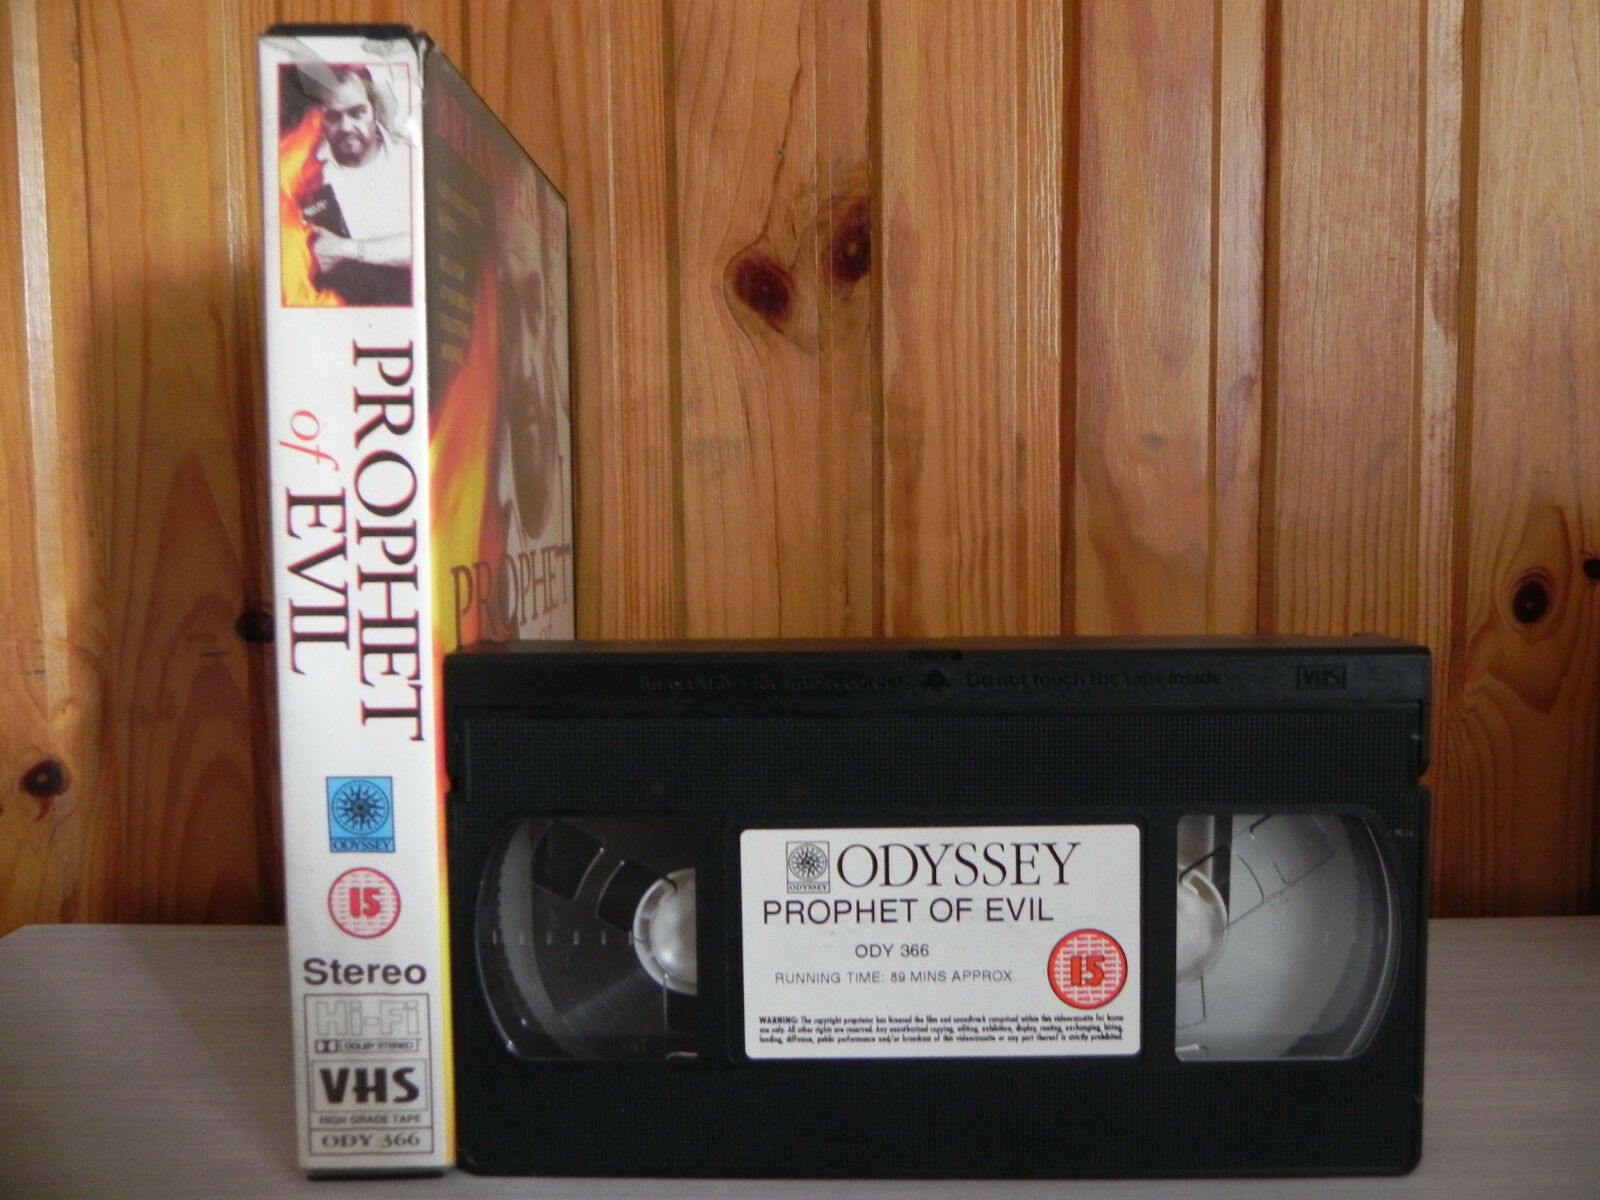 Prophet Of Evil - The True Story Of A Cult Leader - 12 Wives - Serious Drama VHS-